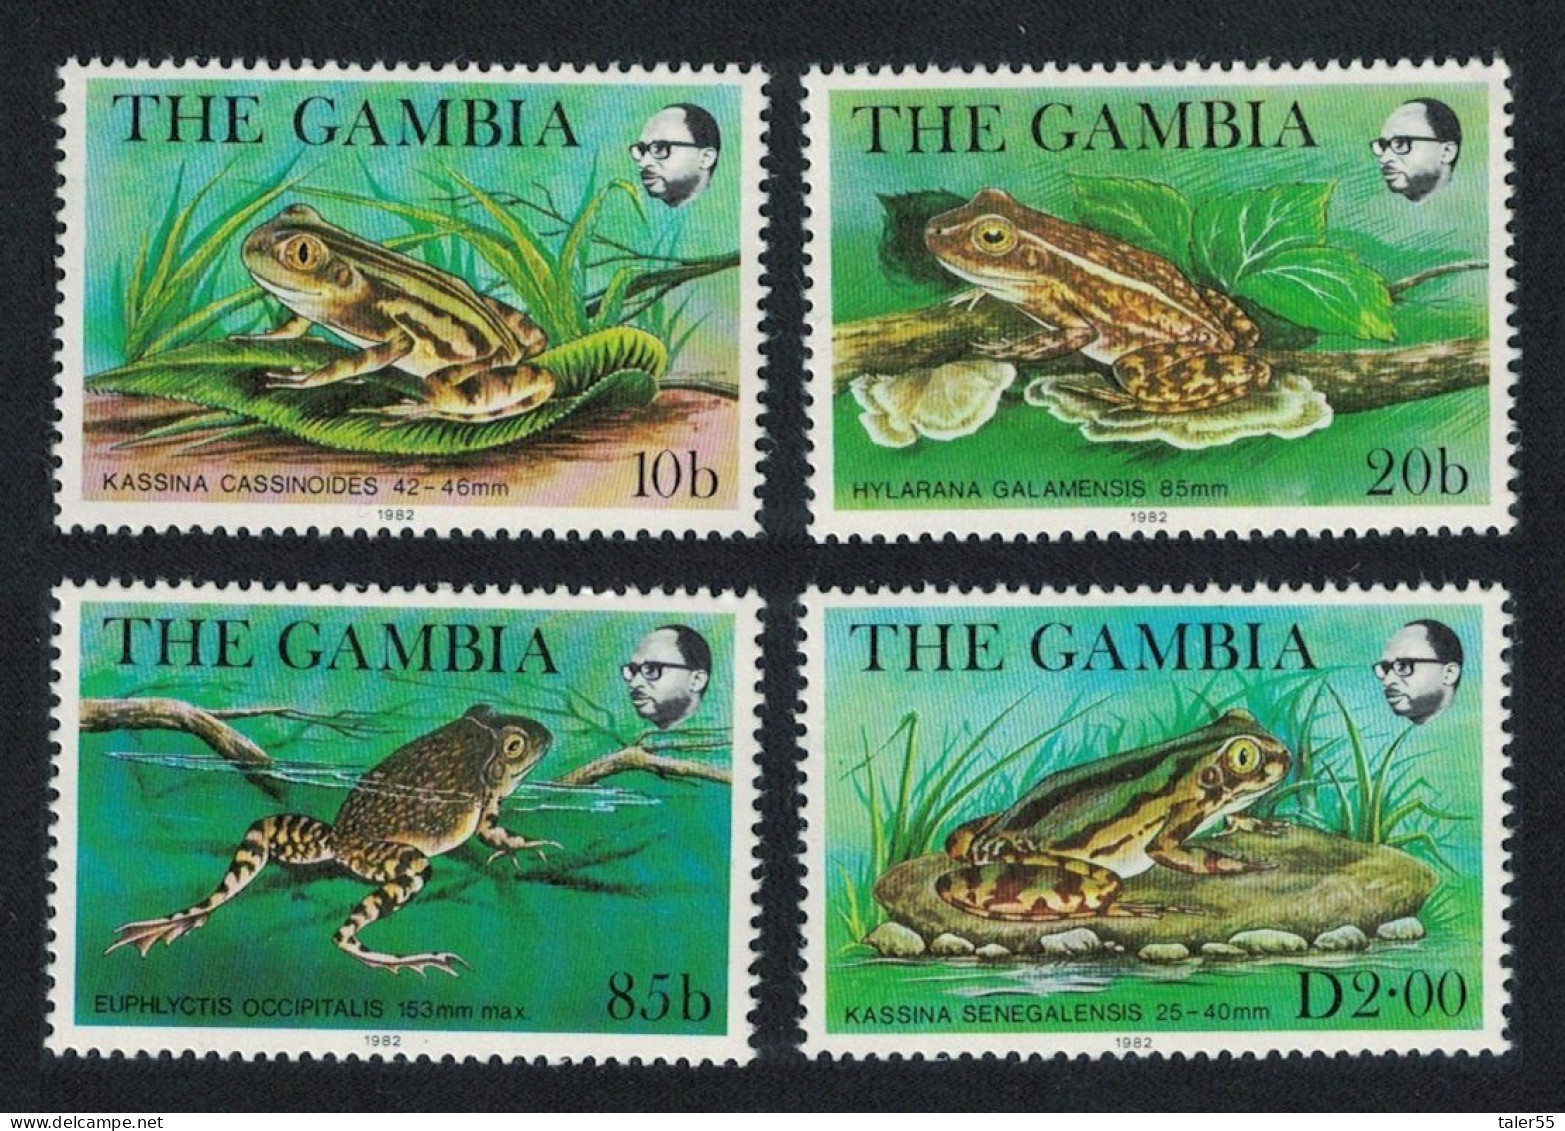 Gambia Frogs 4v 1982 MNH SG#484-487 - Gambie (1965-...)